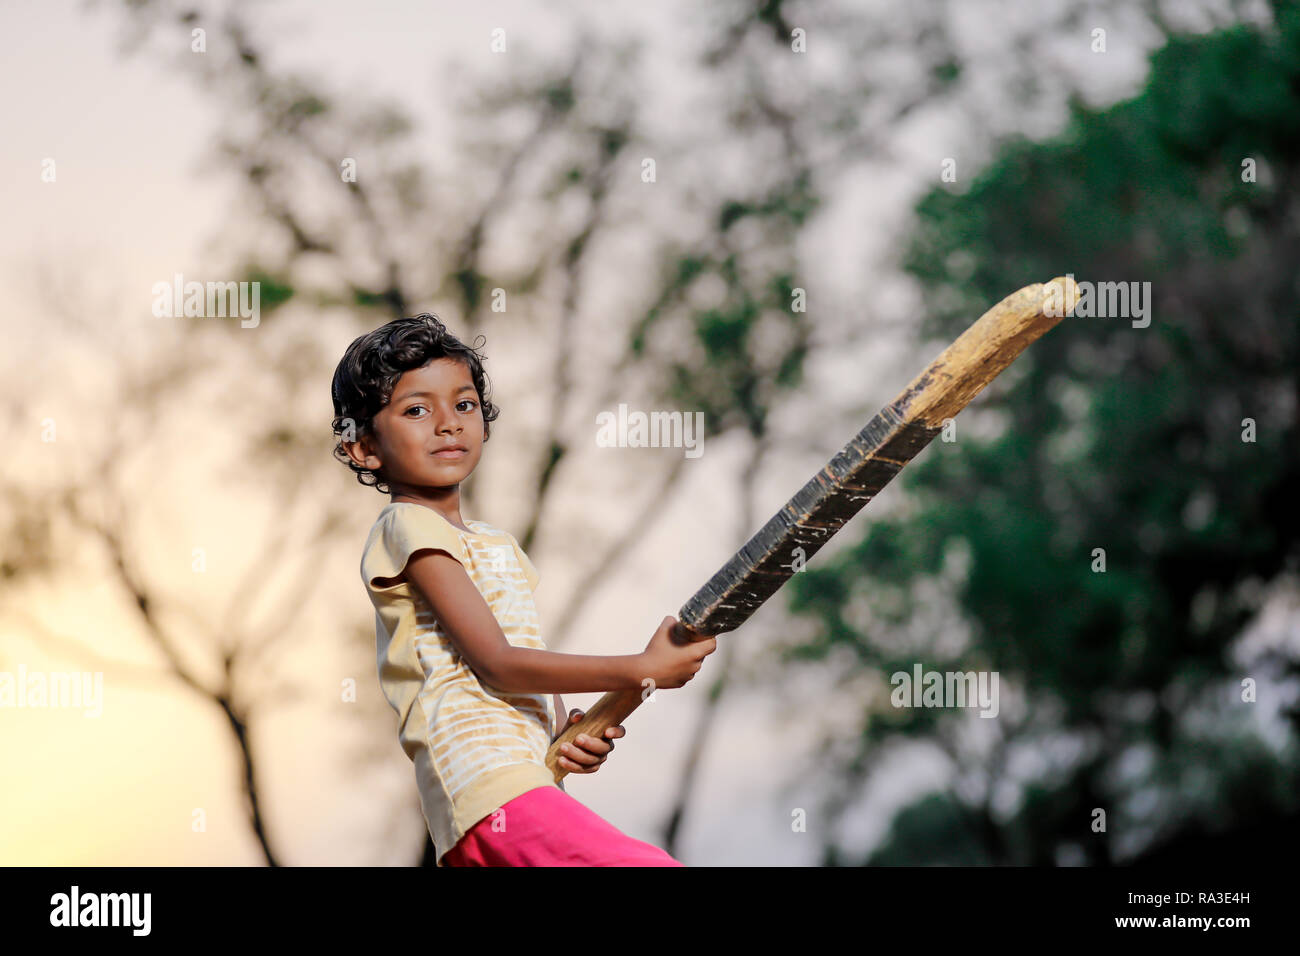 Indian girl child playing cricket Banque D'Images